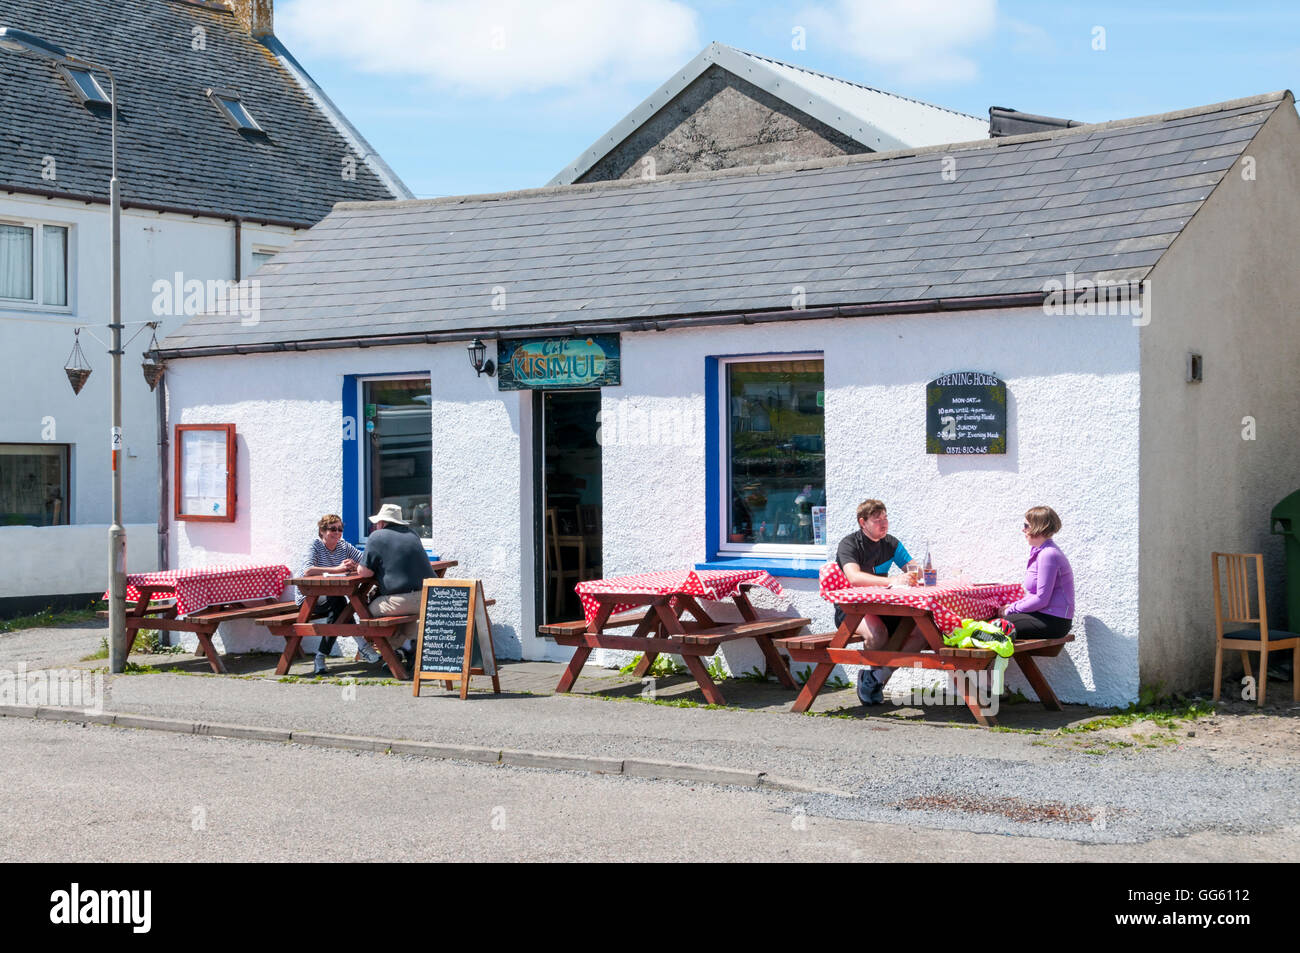 People sitting outside Cafe Kisimul in Castlebay on the island of Barra in the Outer Hebrides, Scotland. Stock Photo